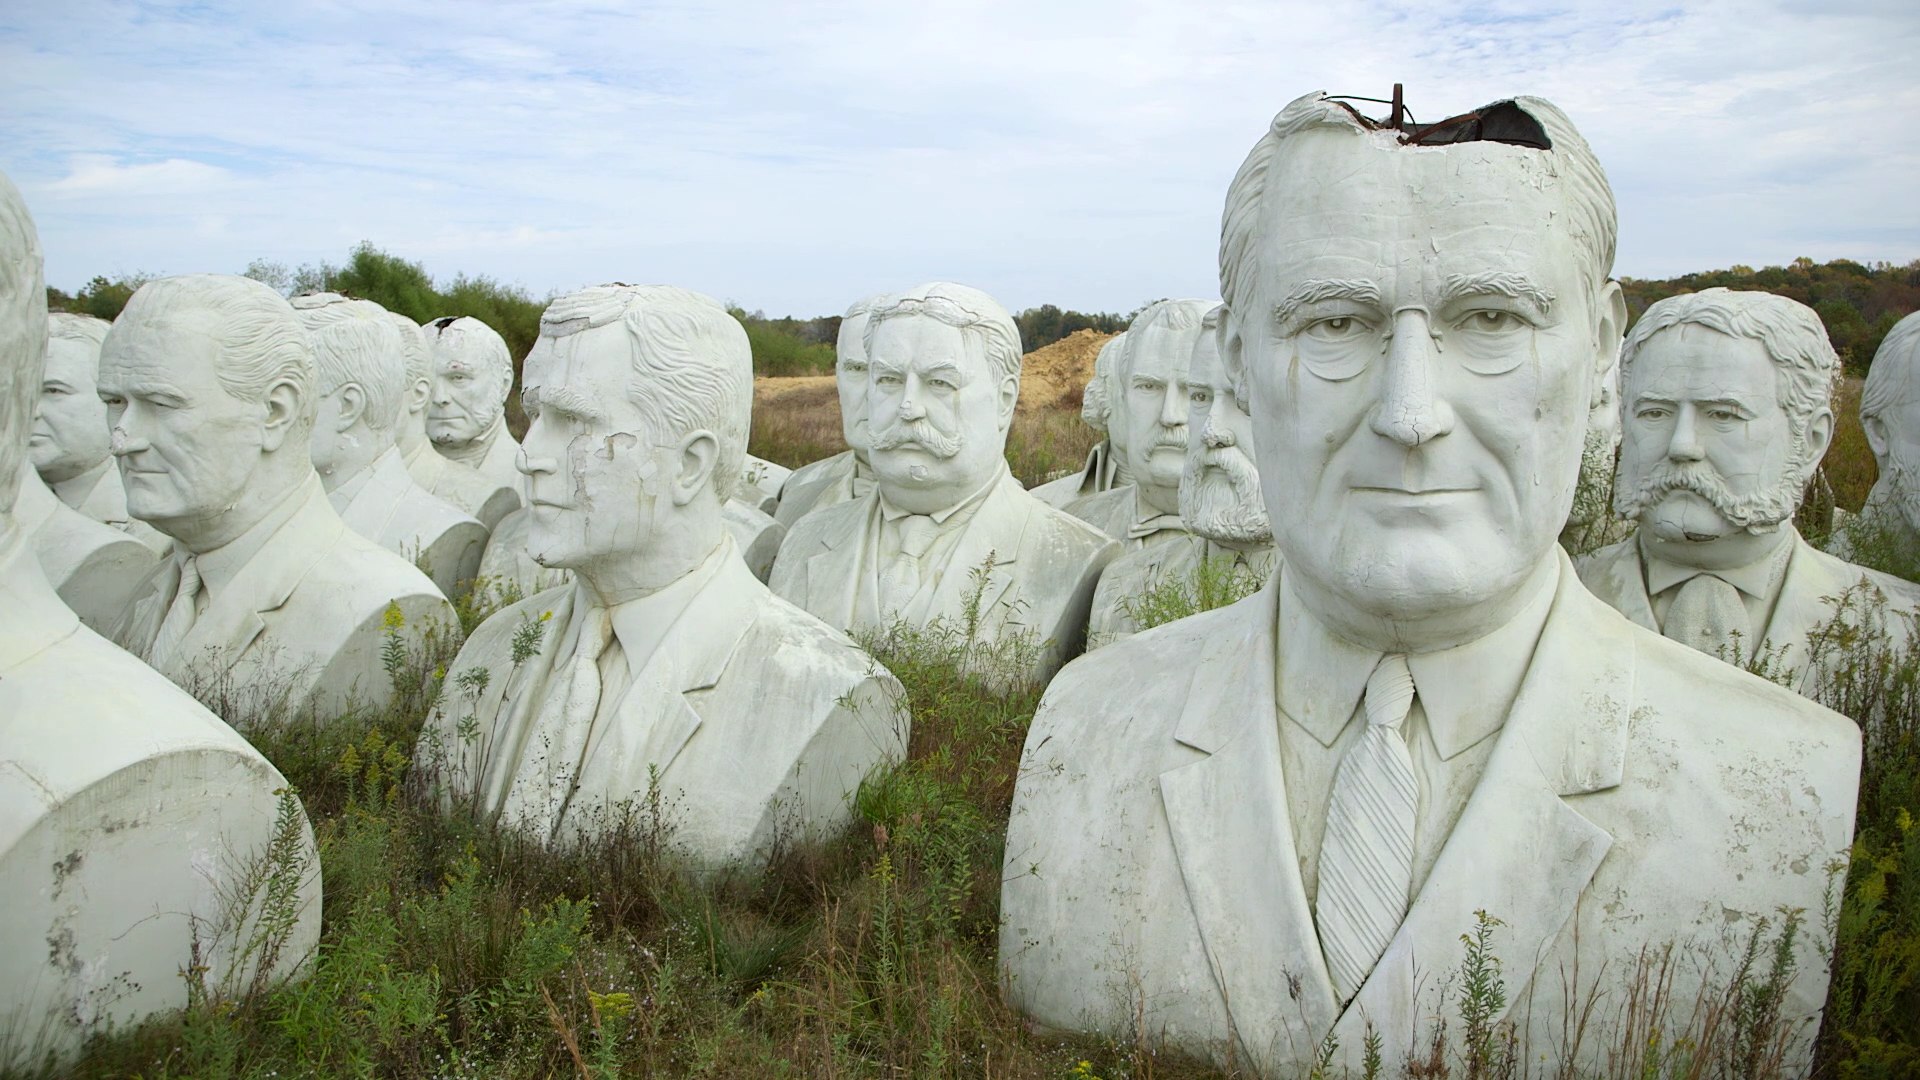 You Can Take a Photo Tour of a Field Full of Giant President Heads